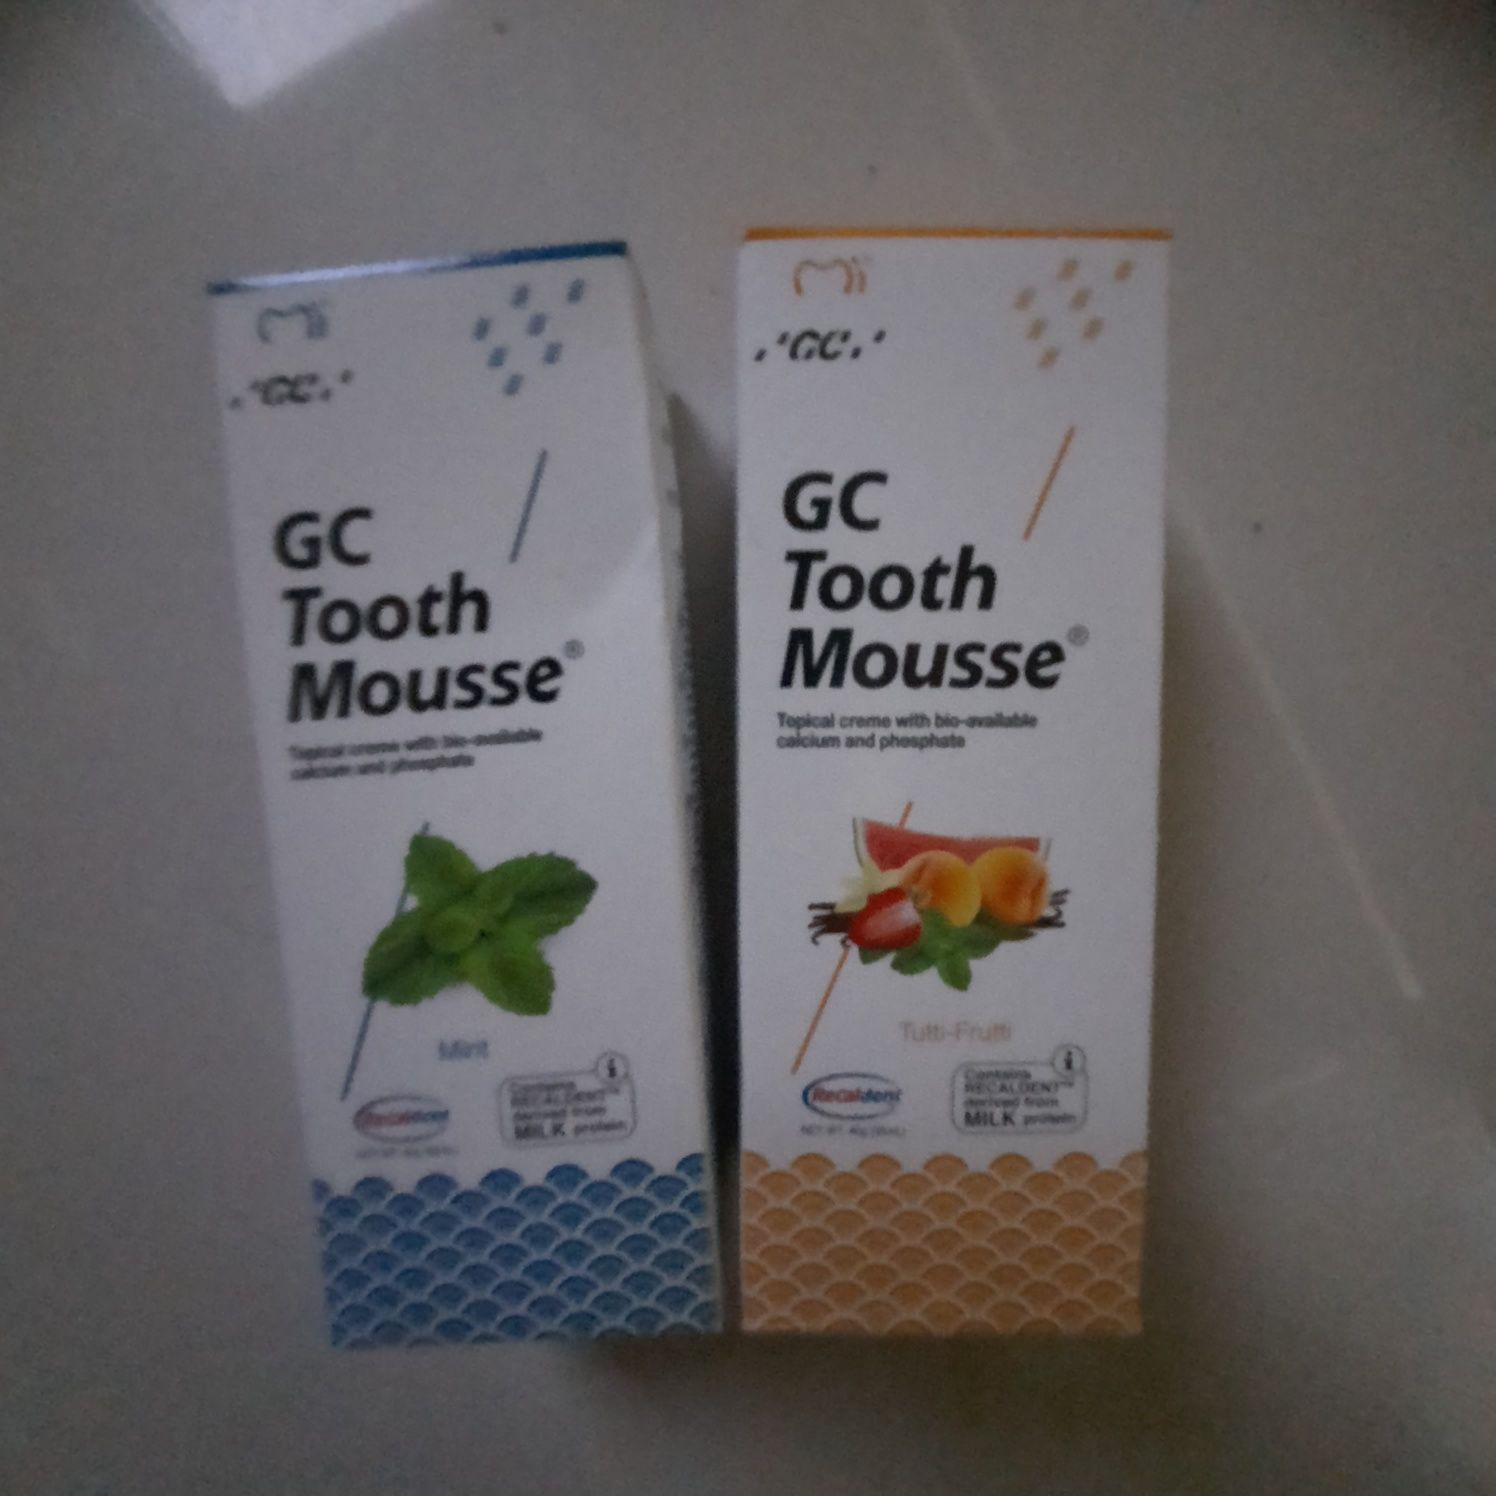 GC Tooth Mousse pasta